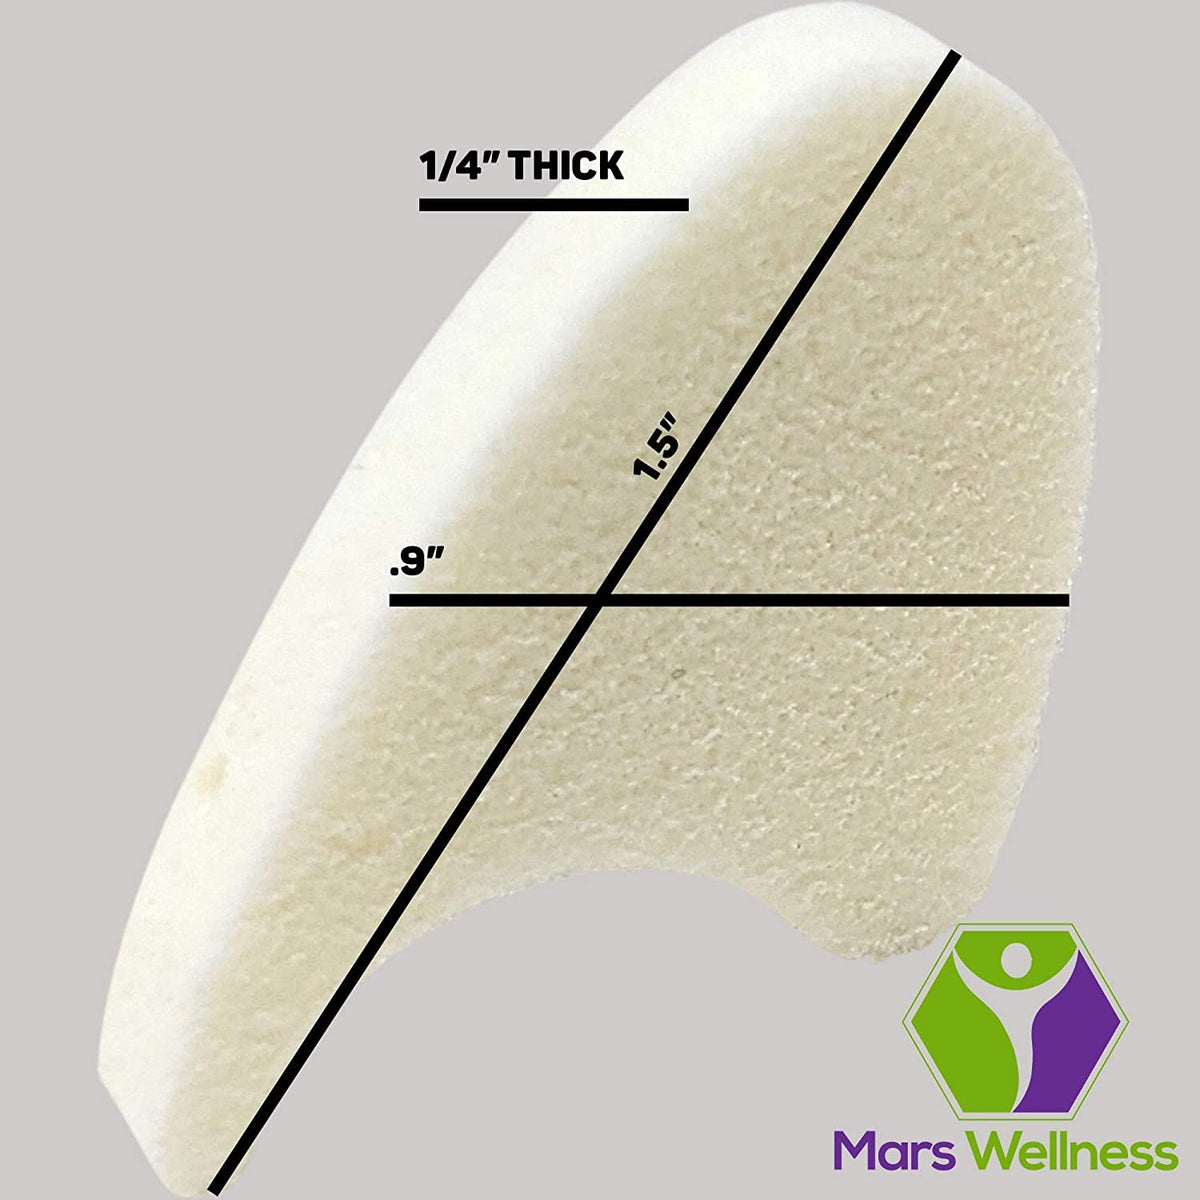 Mars Wellness Full Foam Toe Separators - Toe Spacers for Corn, Blisters, and Hammer Toe Relief - 1/4 Inch - Bulk Pack of 100 Toe Pads - Mars Med Supply